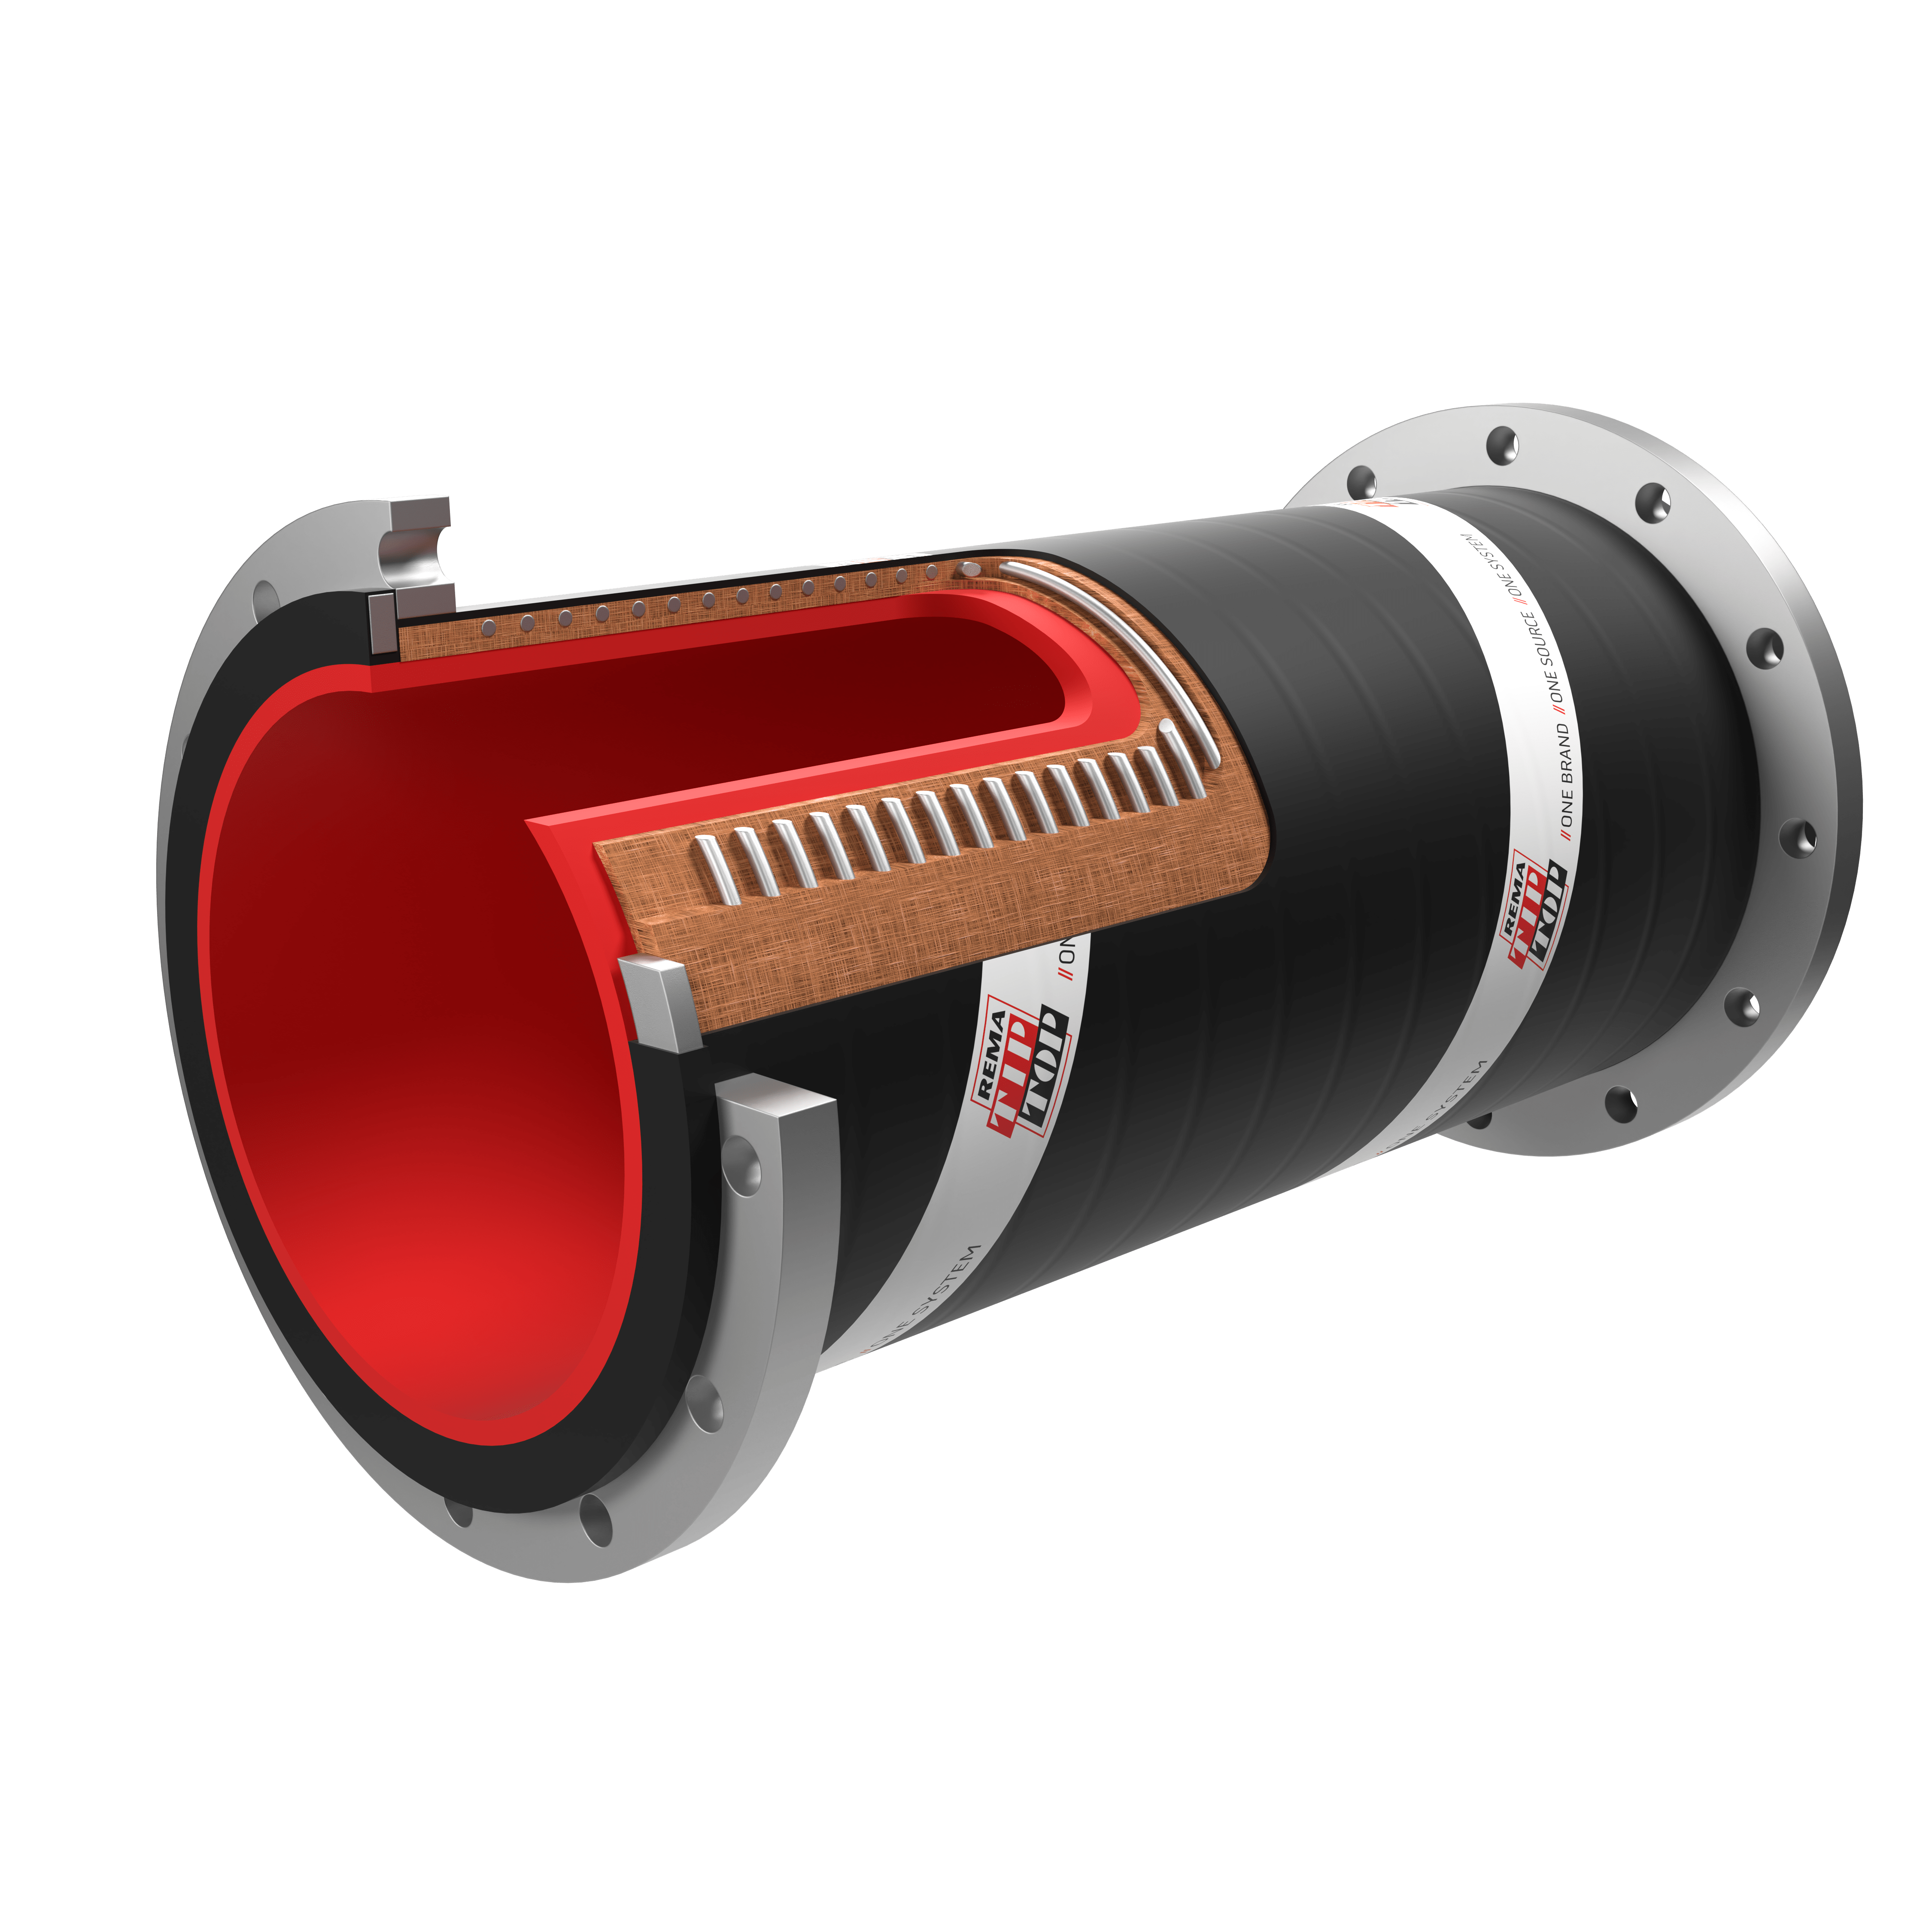 A cross-sectional view of a black cylindrical REMATEX Hard-Wall Suction & Delivery Hose with a red interior, showing layered construction and exposed bands, flanges at both ends.